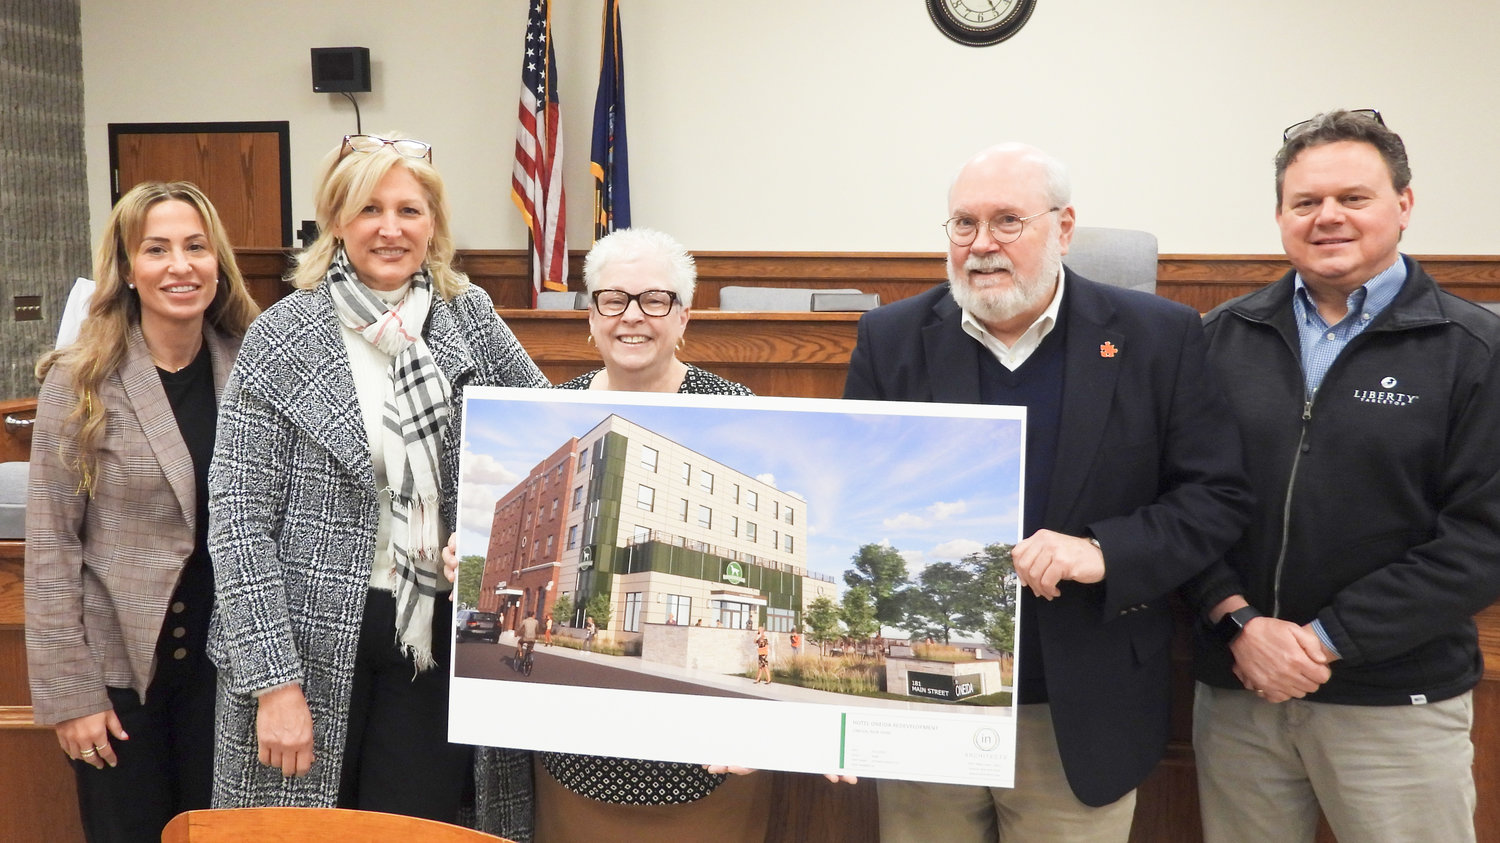 Members of Oneida city government and a member of the development team pose with a rendering showing what the Oneida Hotel will look like in 2024. Pictured: Supervisor Brandee DuBois, left, Mary Cavangh, Mayor Helen Acker, Managing Member Edward Riley, and Supervisor Matthew Roberts